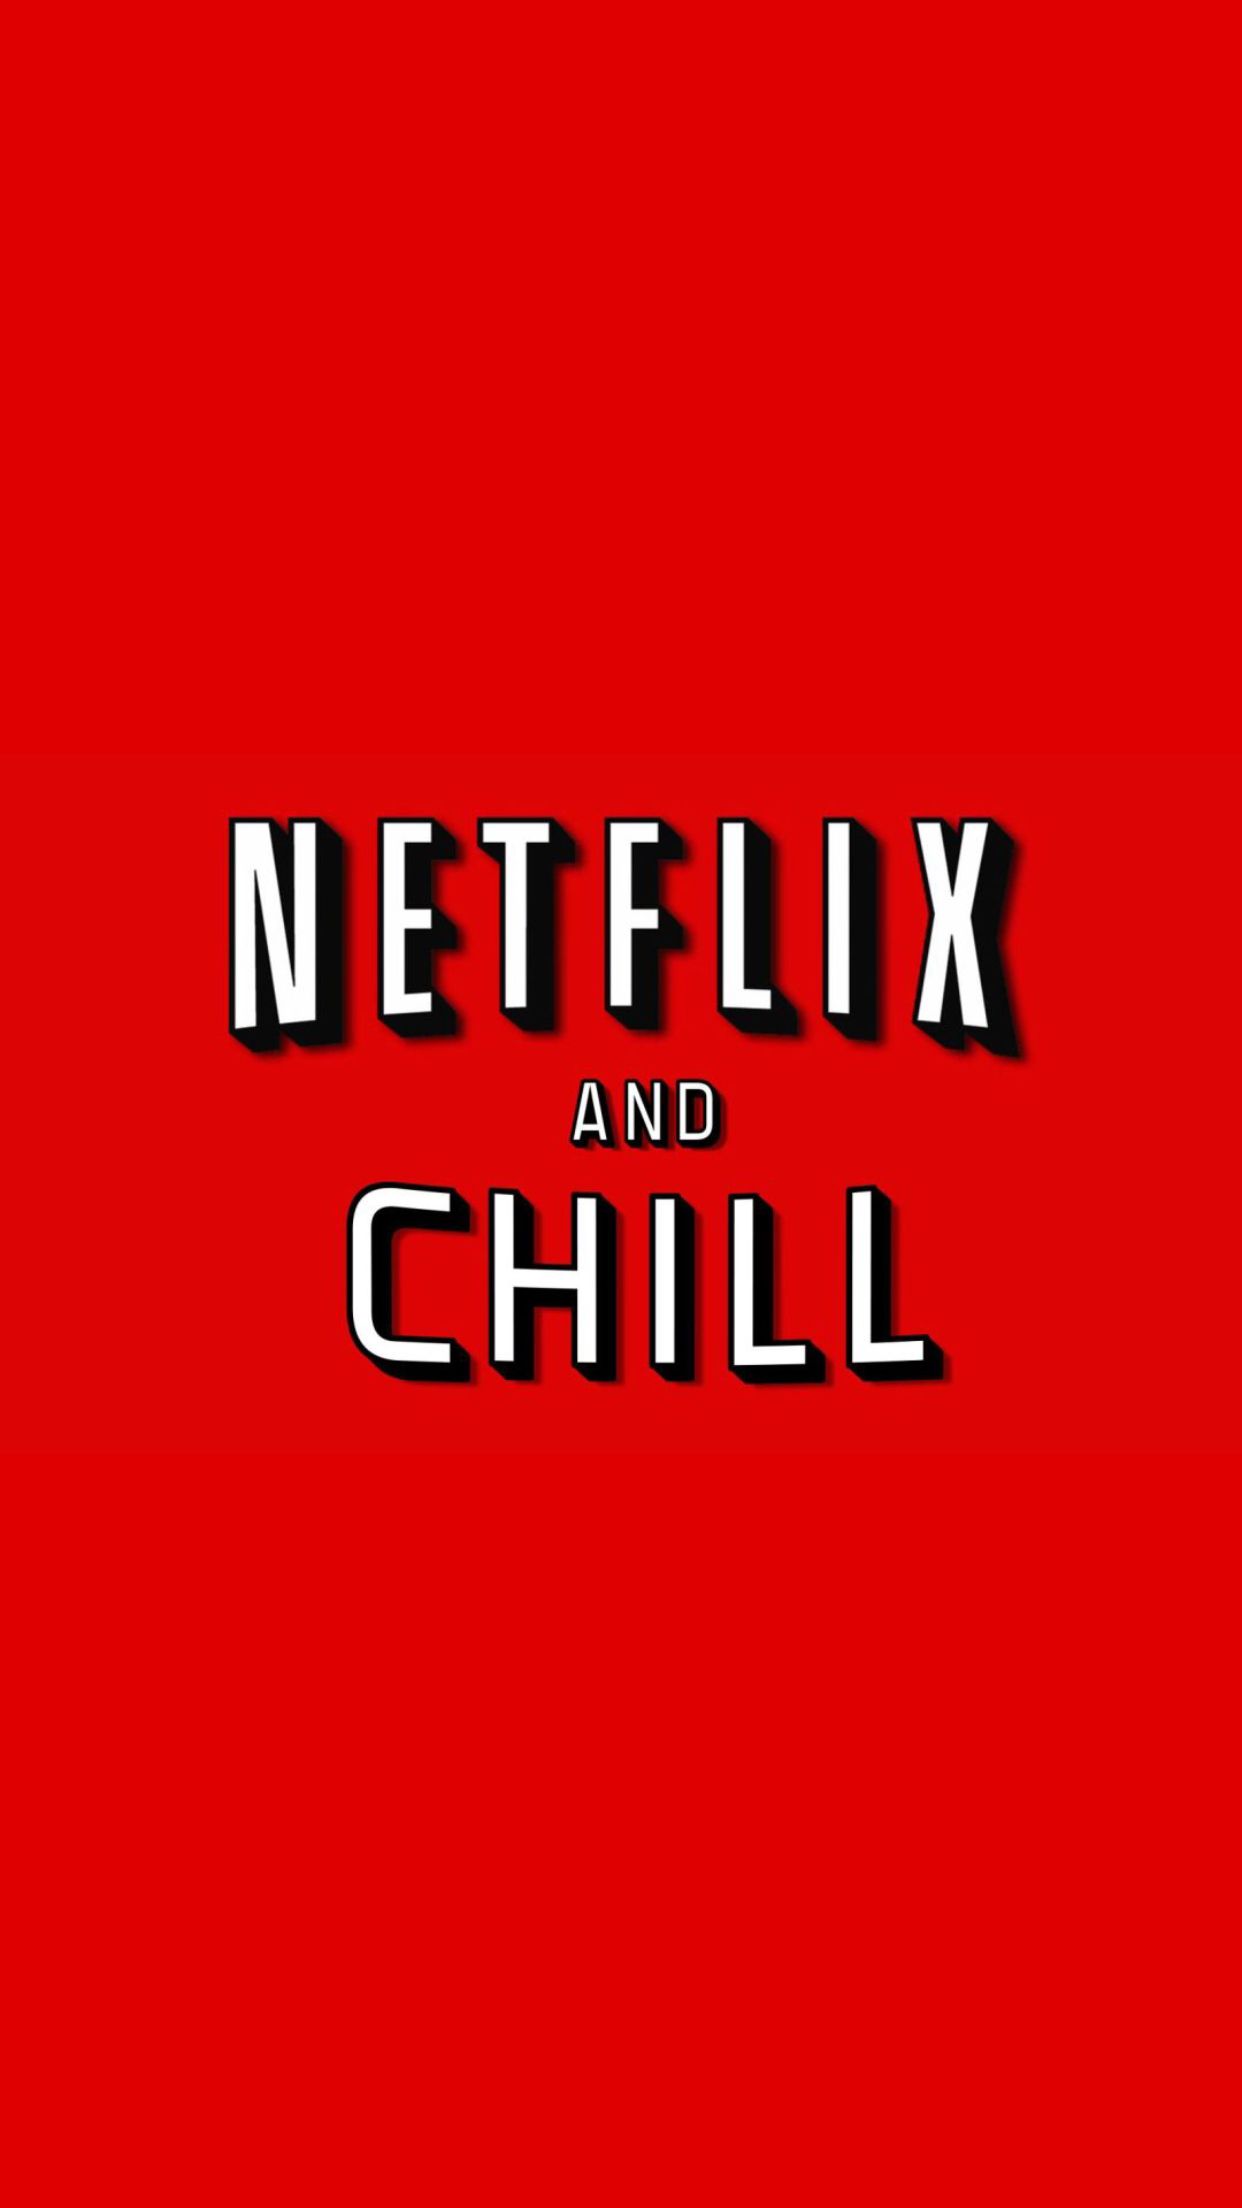 Flix And Chill Wallpaper Top